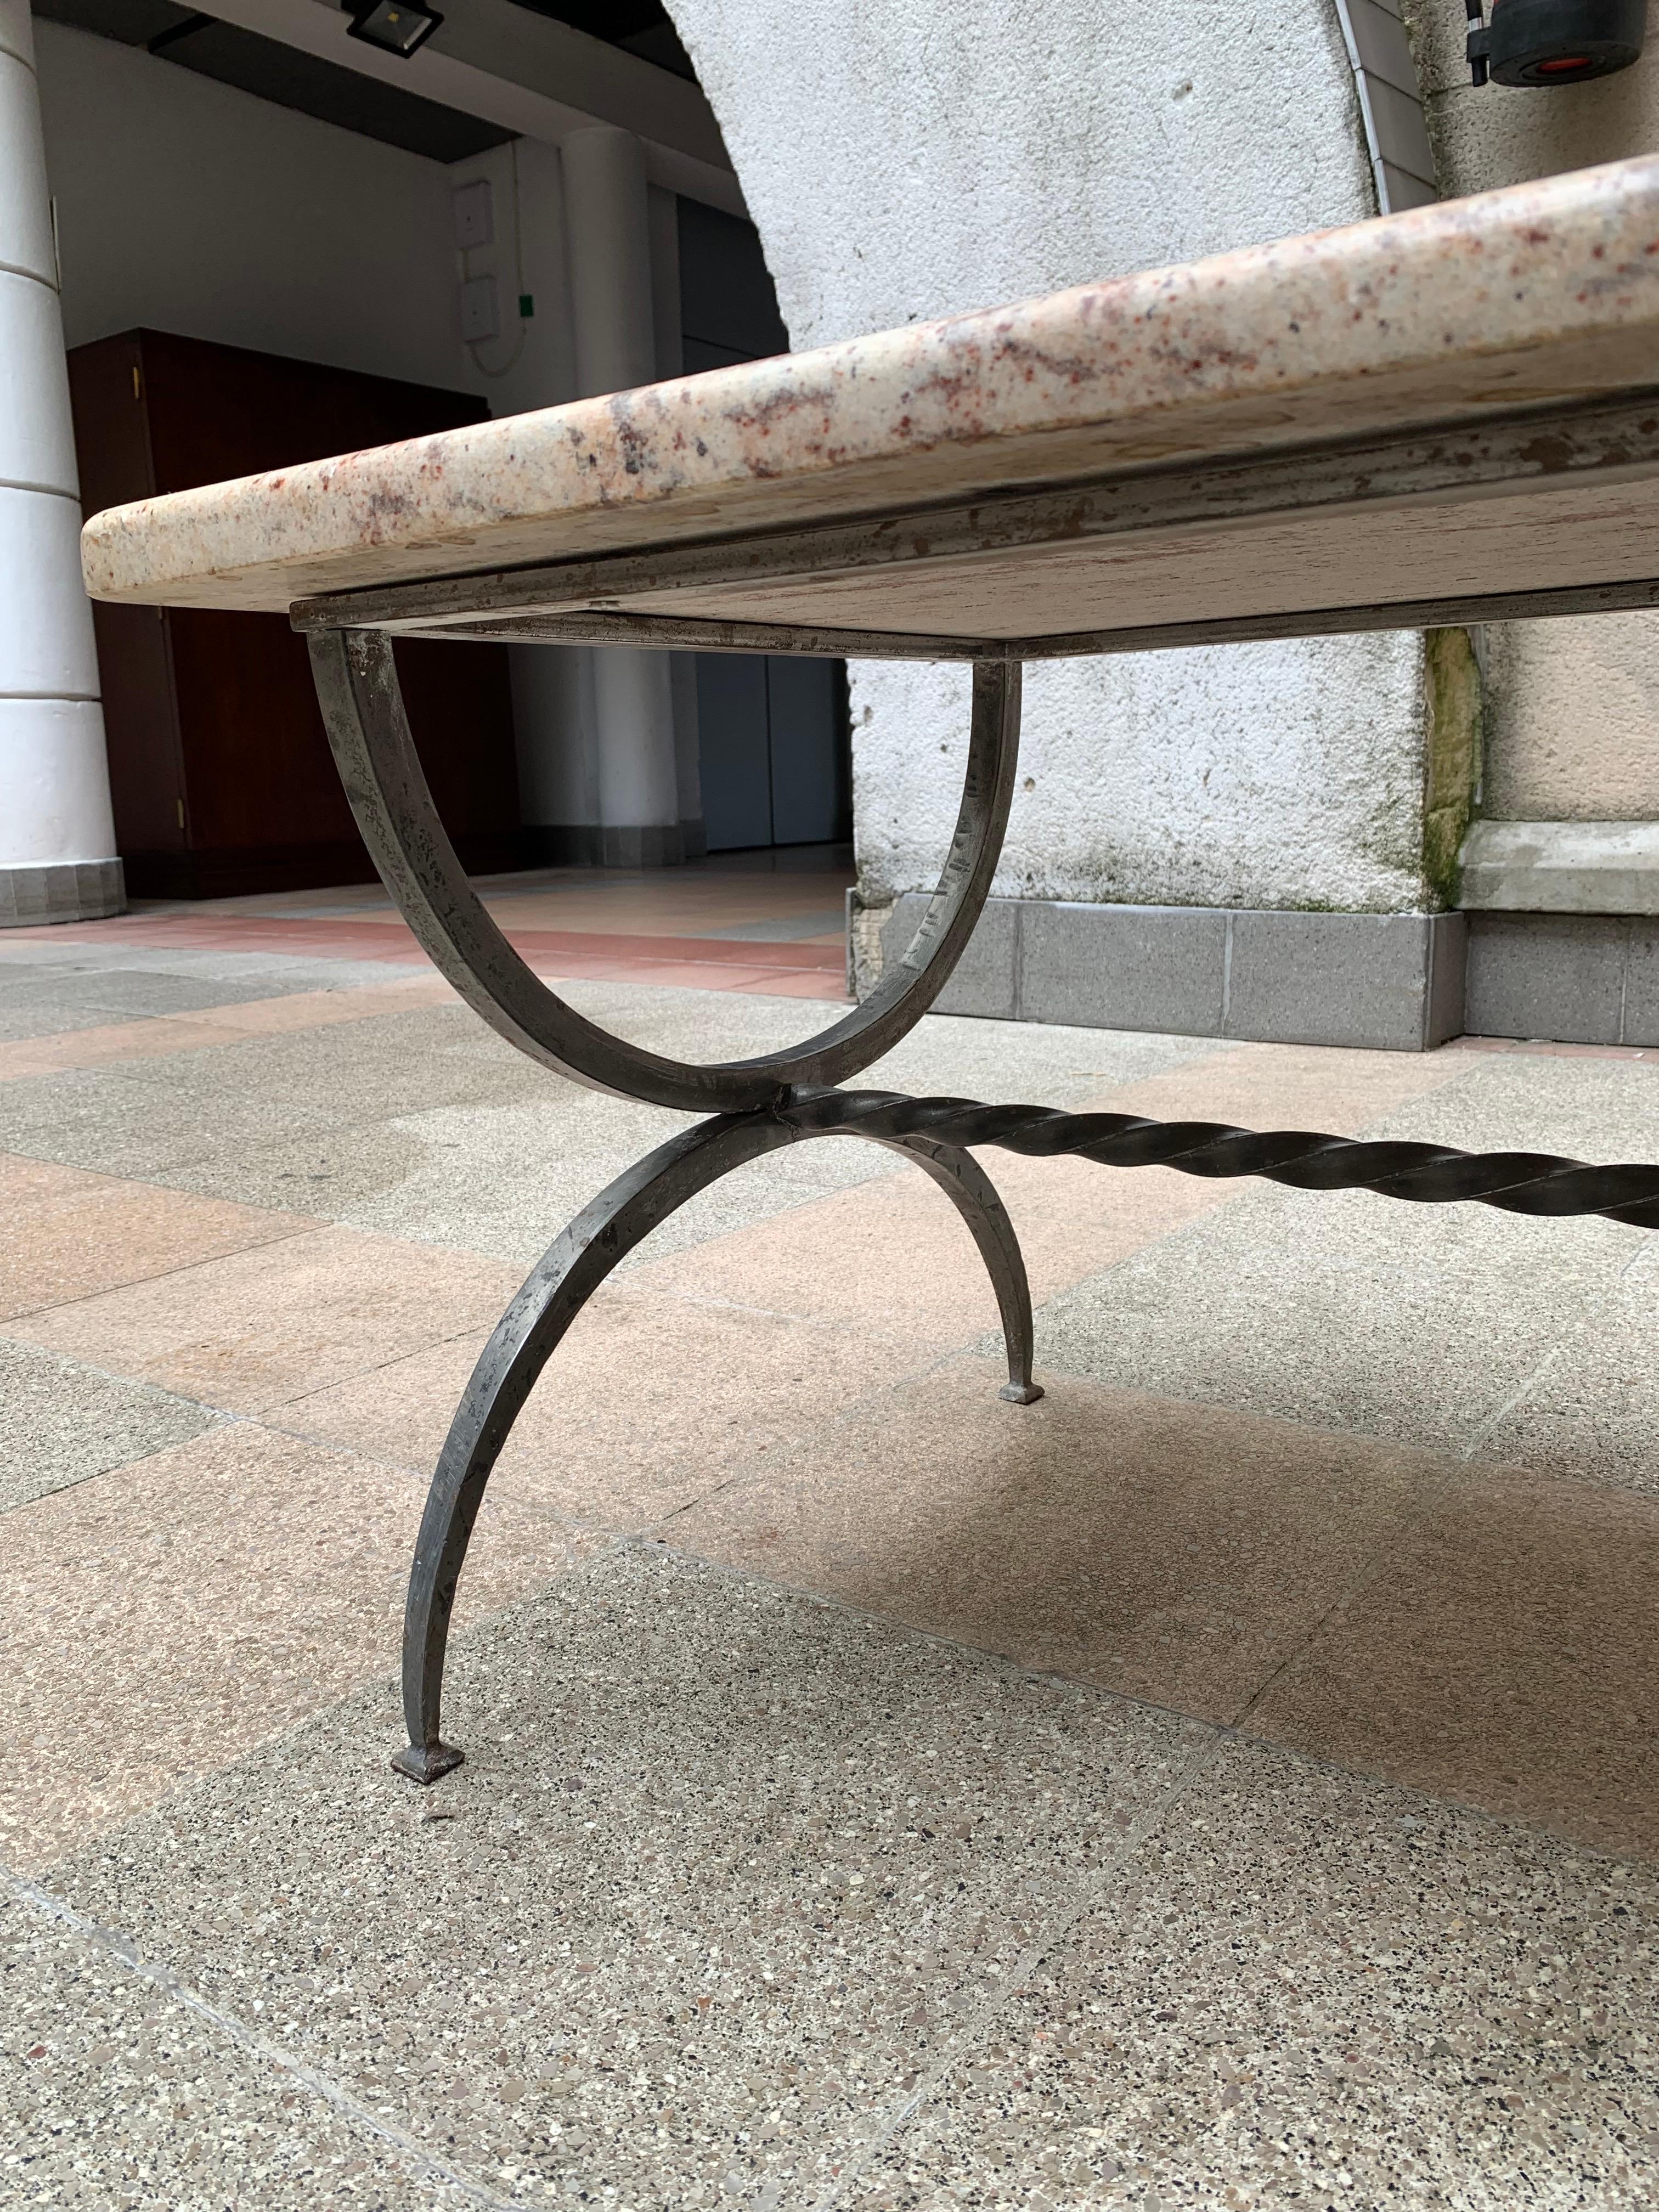 Coffee table in the style of Jansen, 
Circa 1975
Pewter-style metal legs and marble top
Dimensions: L 115 x P 55 x H 46.







